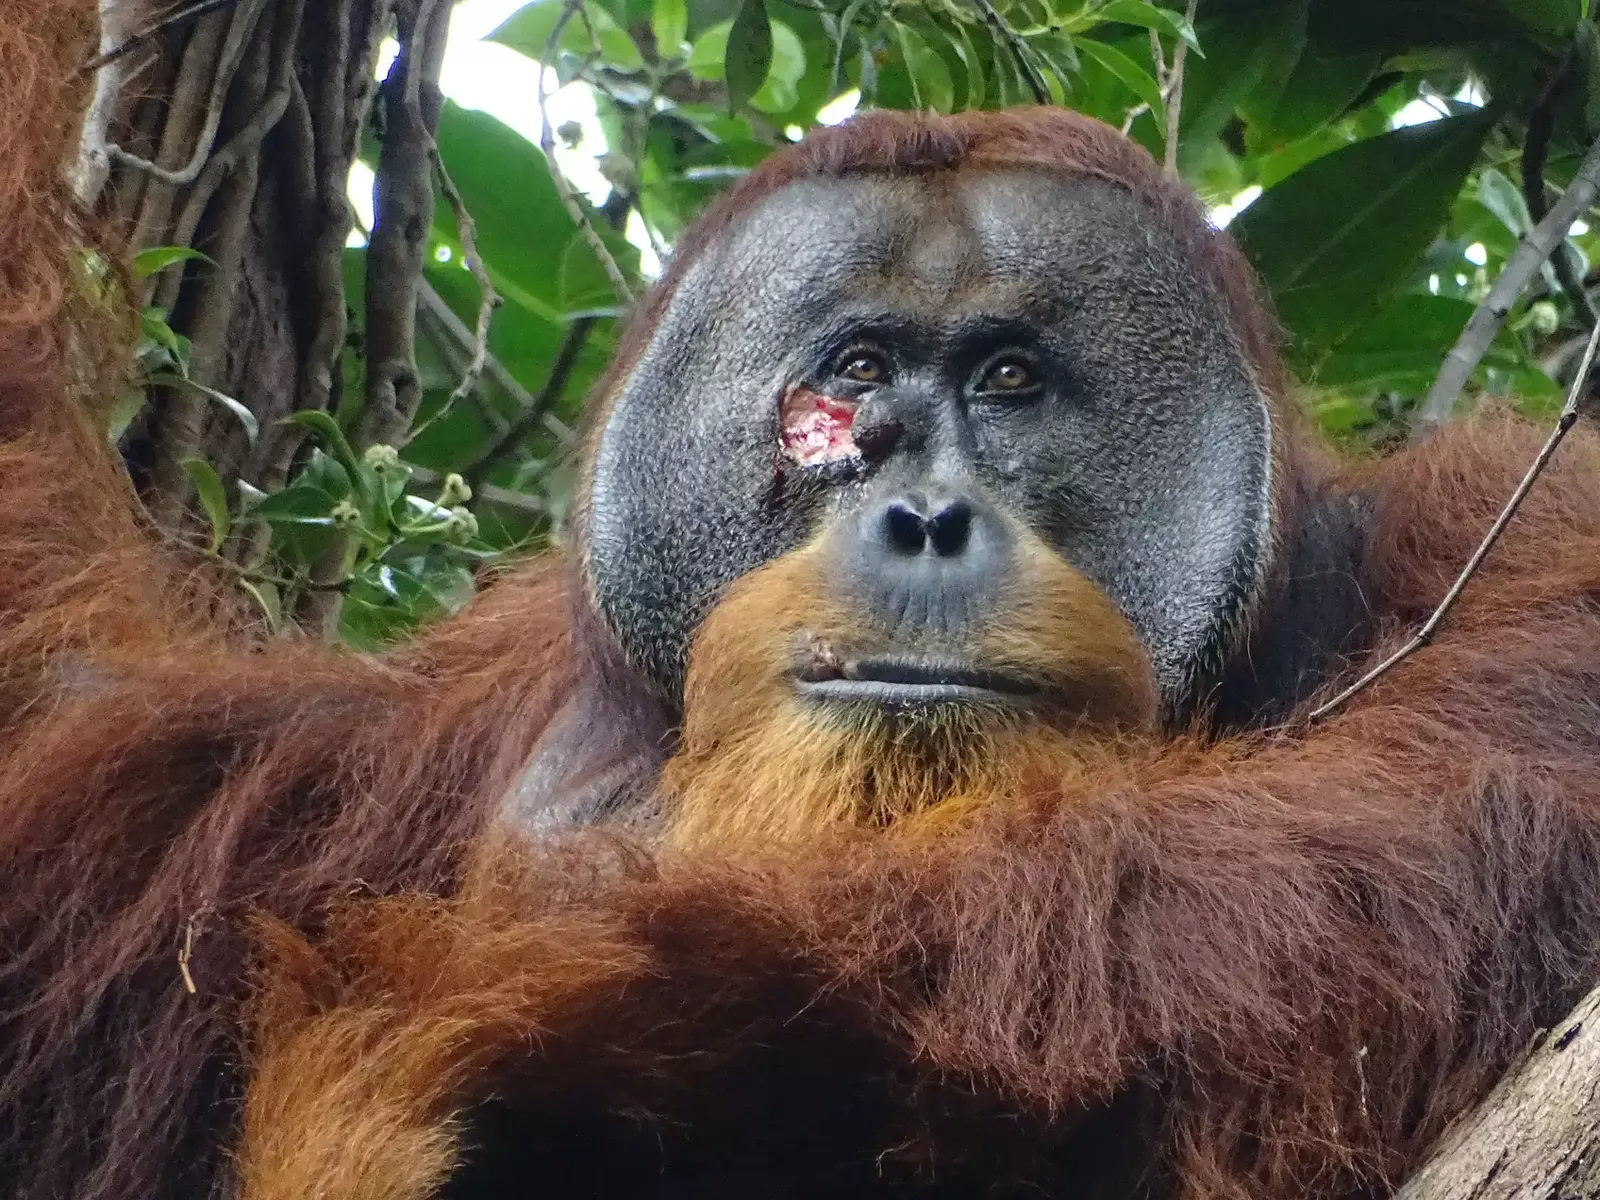 For the first time, an orangutan healed his wound using a well-known medicinal plant  Smart news